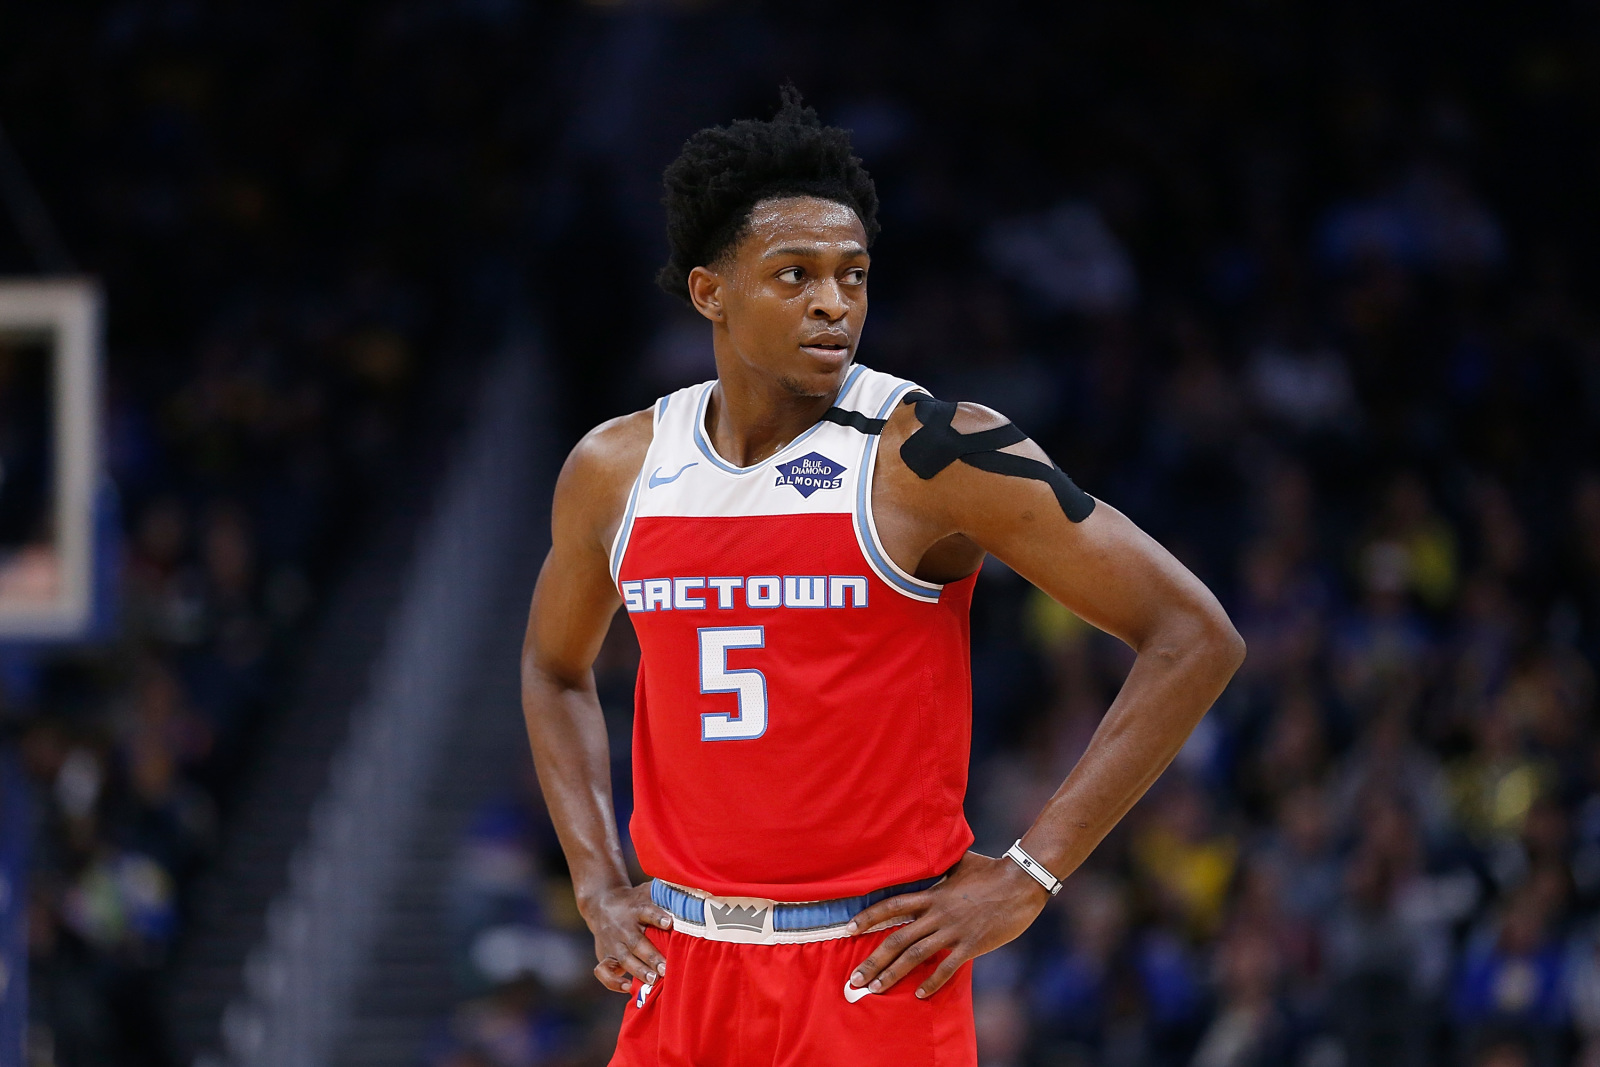 No if ands or buts': De'Aaron Fox plans to play in Game 5 - Sactown Sports